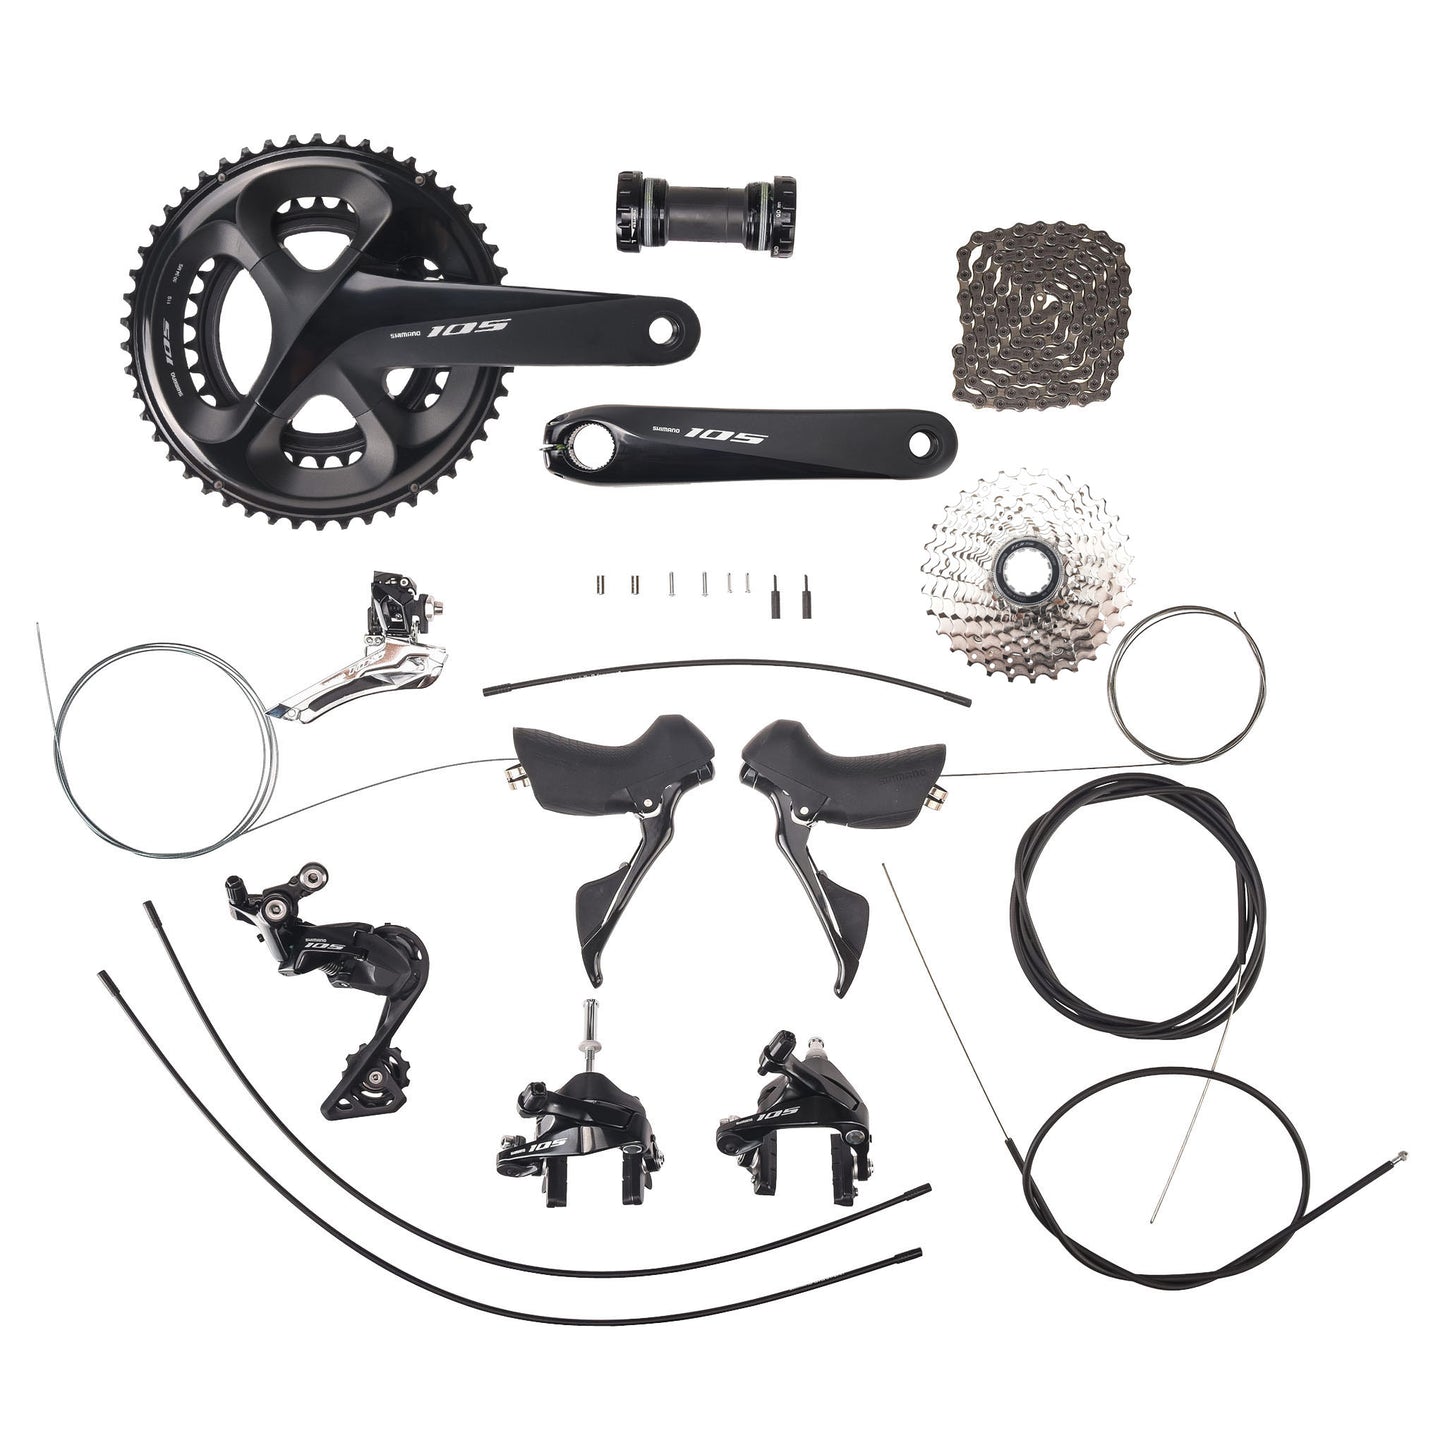 SHIMANO Complete Groupset 105 R7000 34/50 - 11/30 